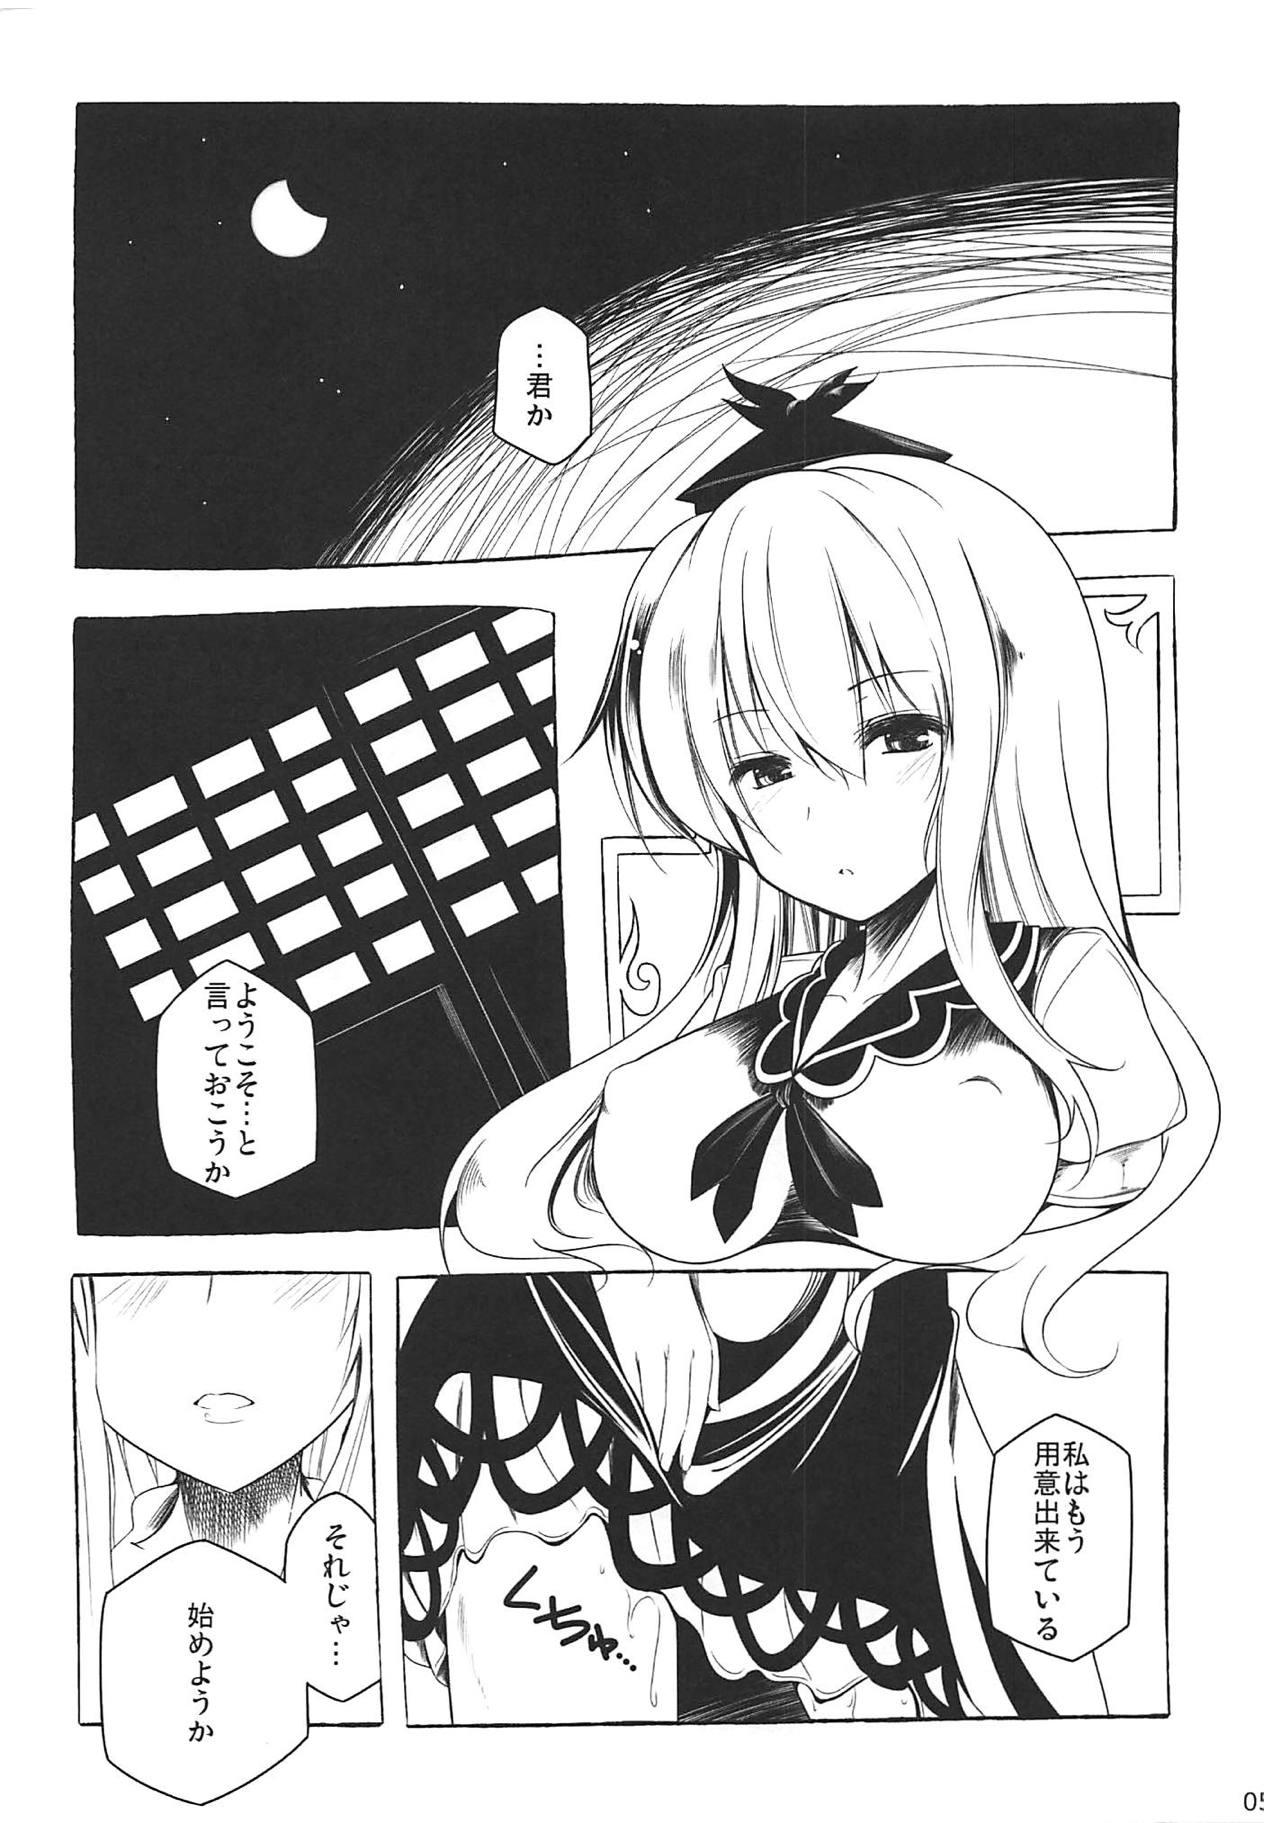 Young Tits metamo - Touhou project Sex Massage - Page 4